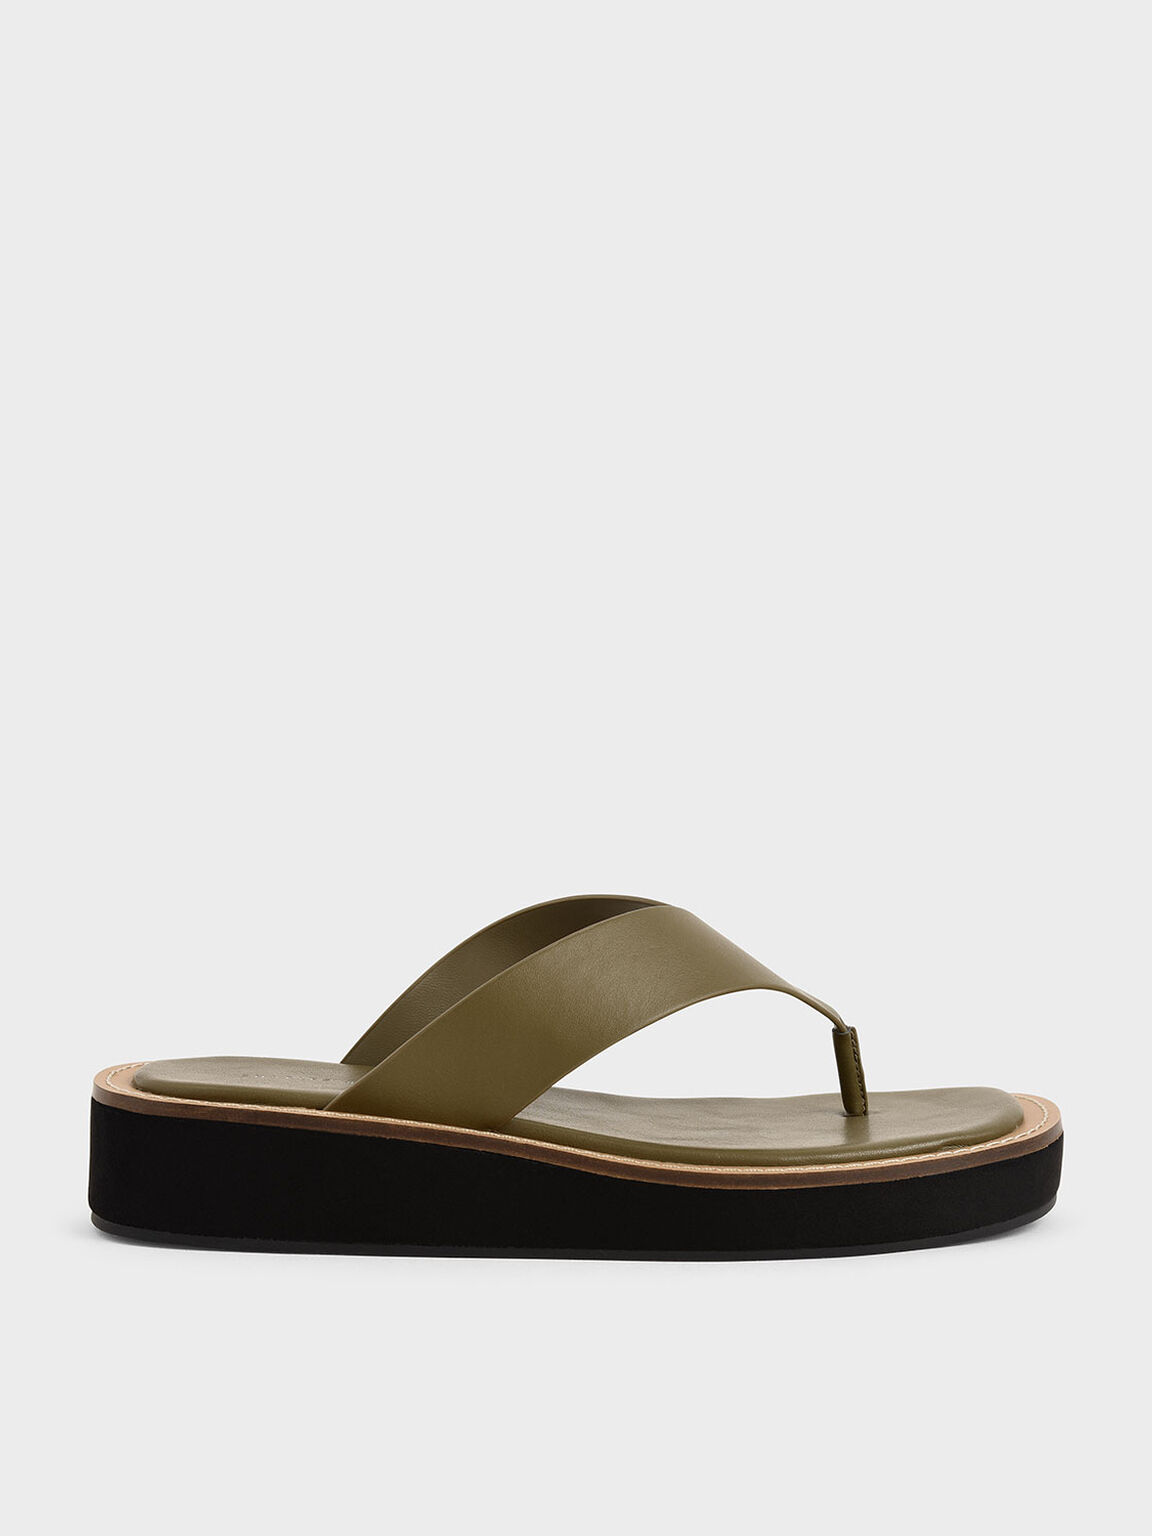 The Best Chunky Flip-Flops to Love and Buy This Season | Who What Wear UK